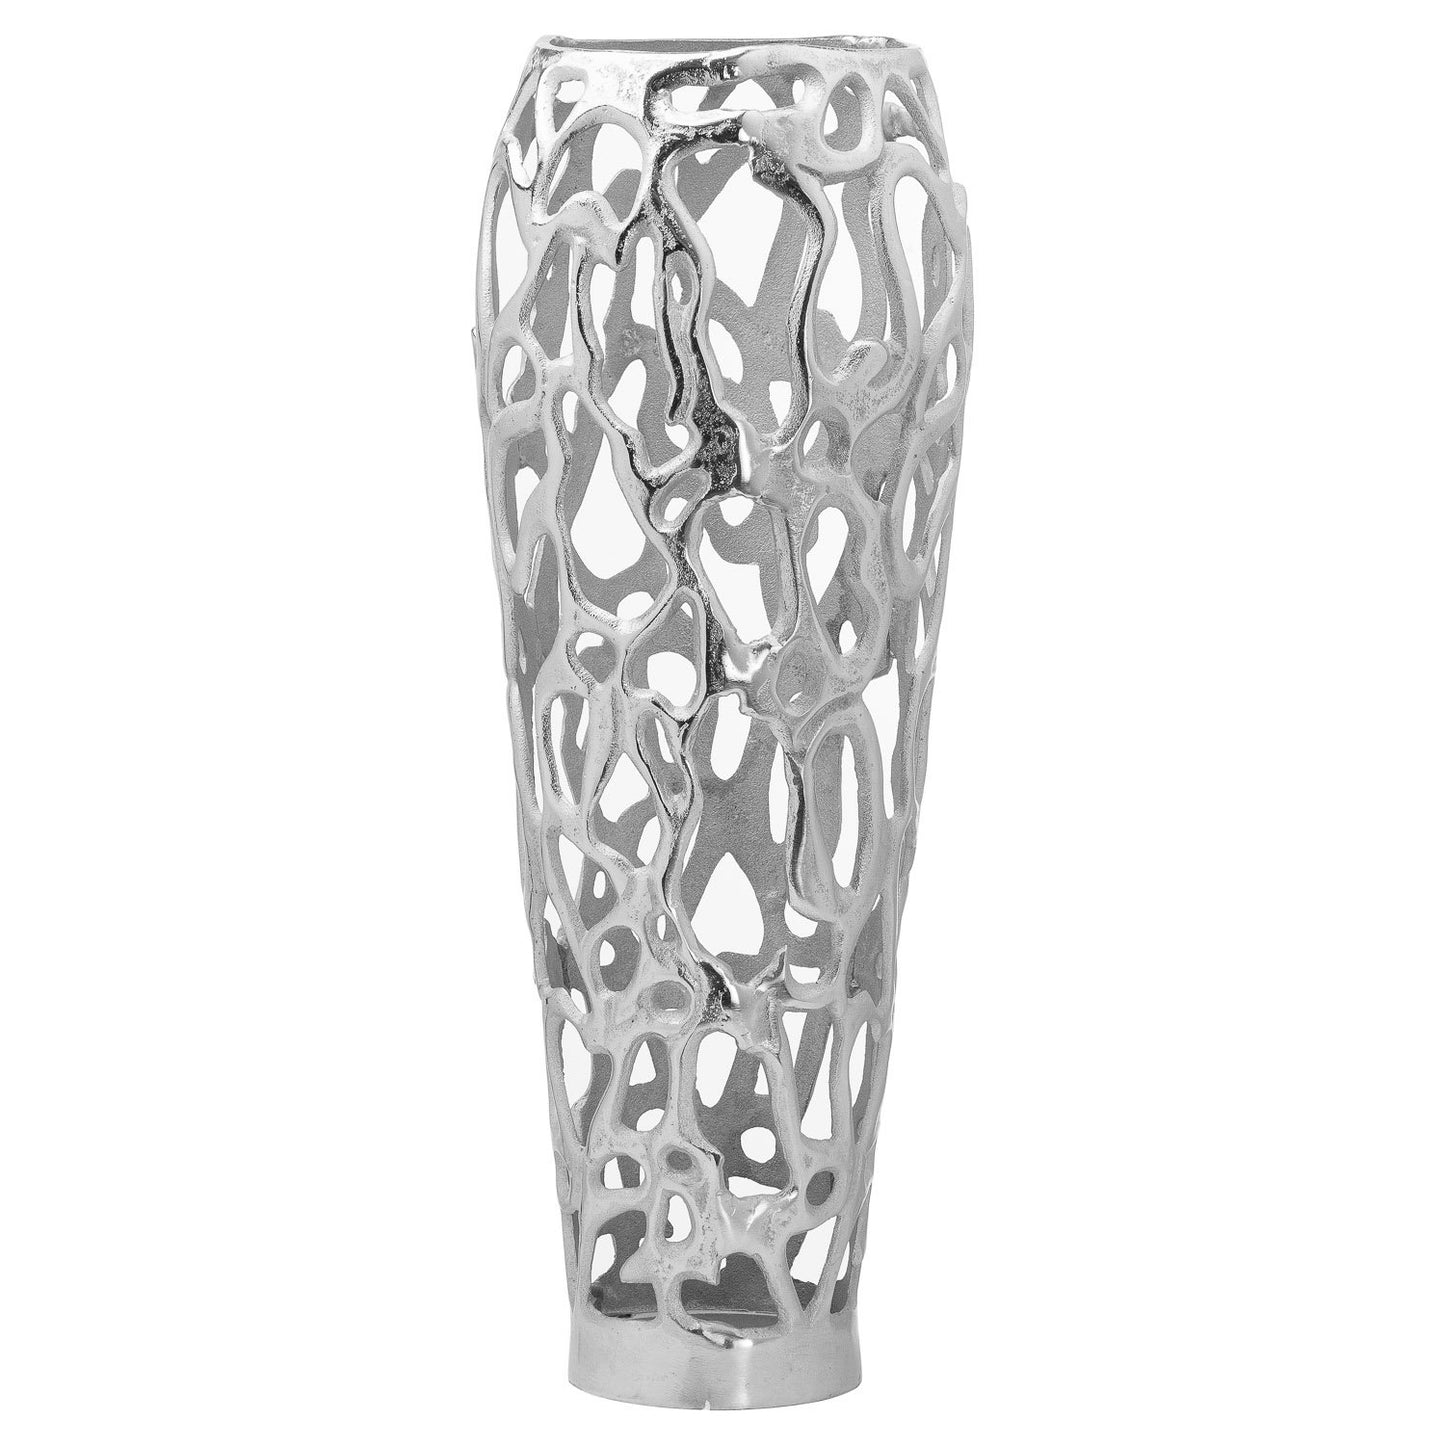 Ohlson Silver Large Perforated Coral Inspired Vase